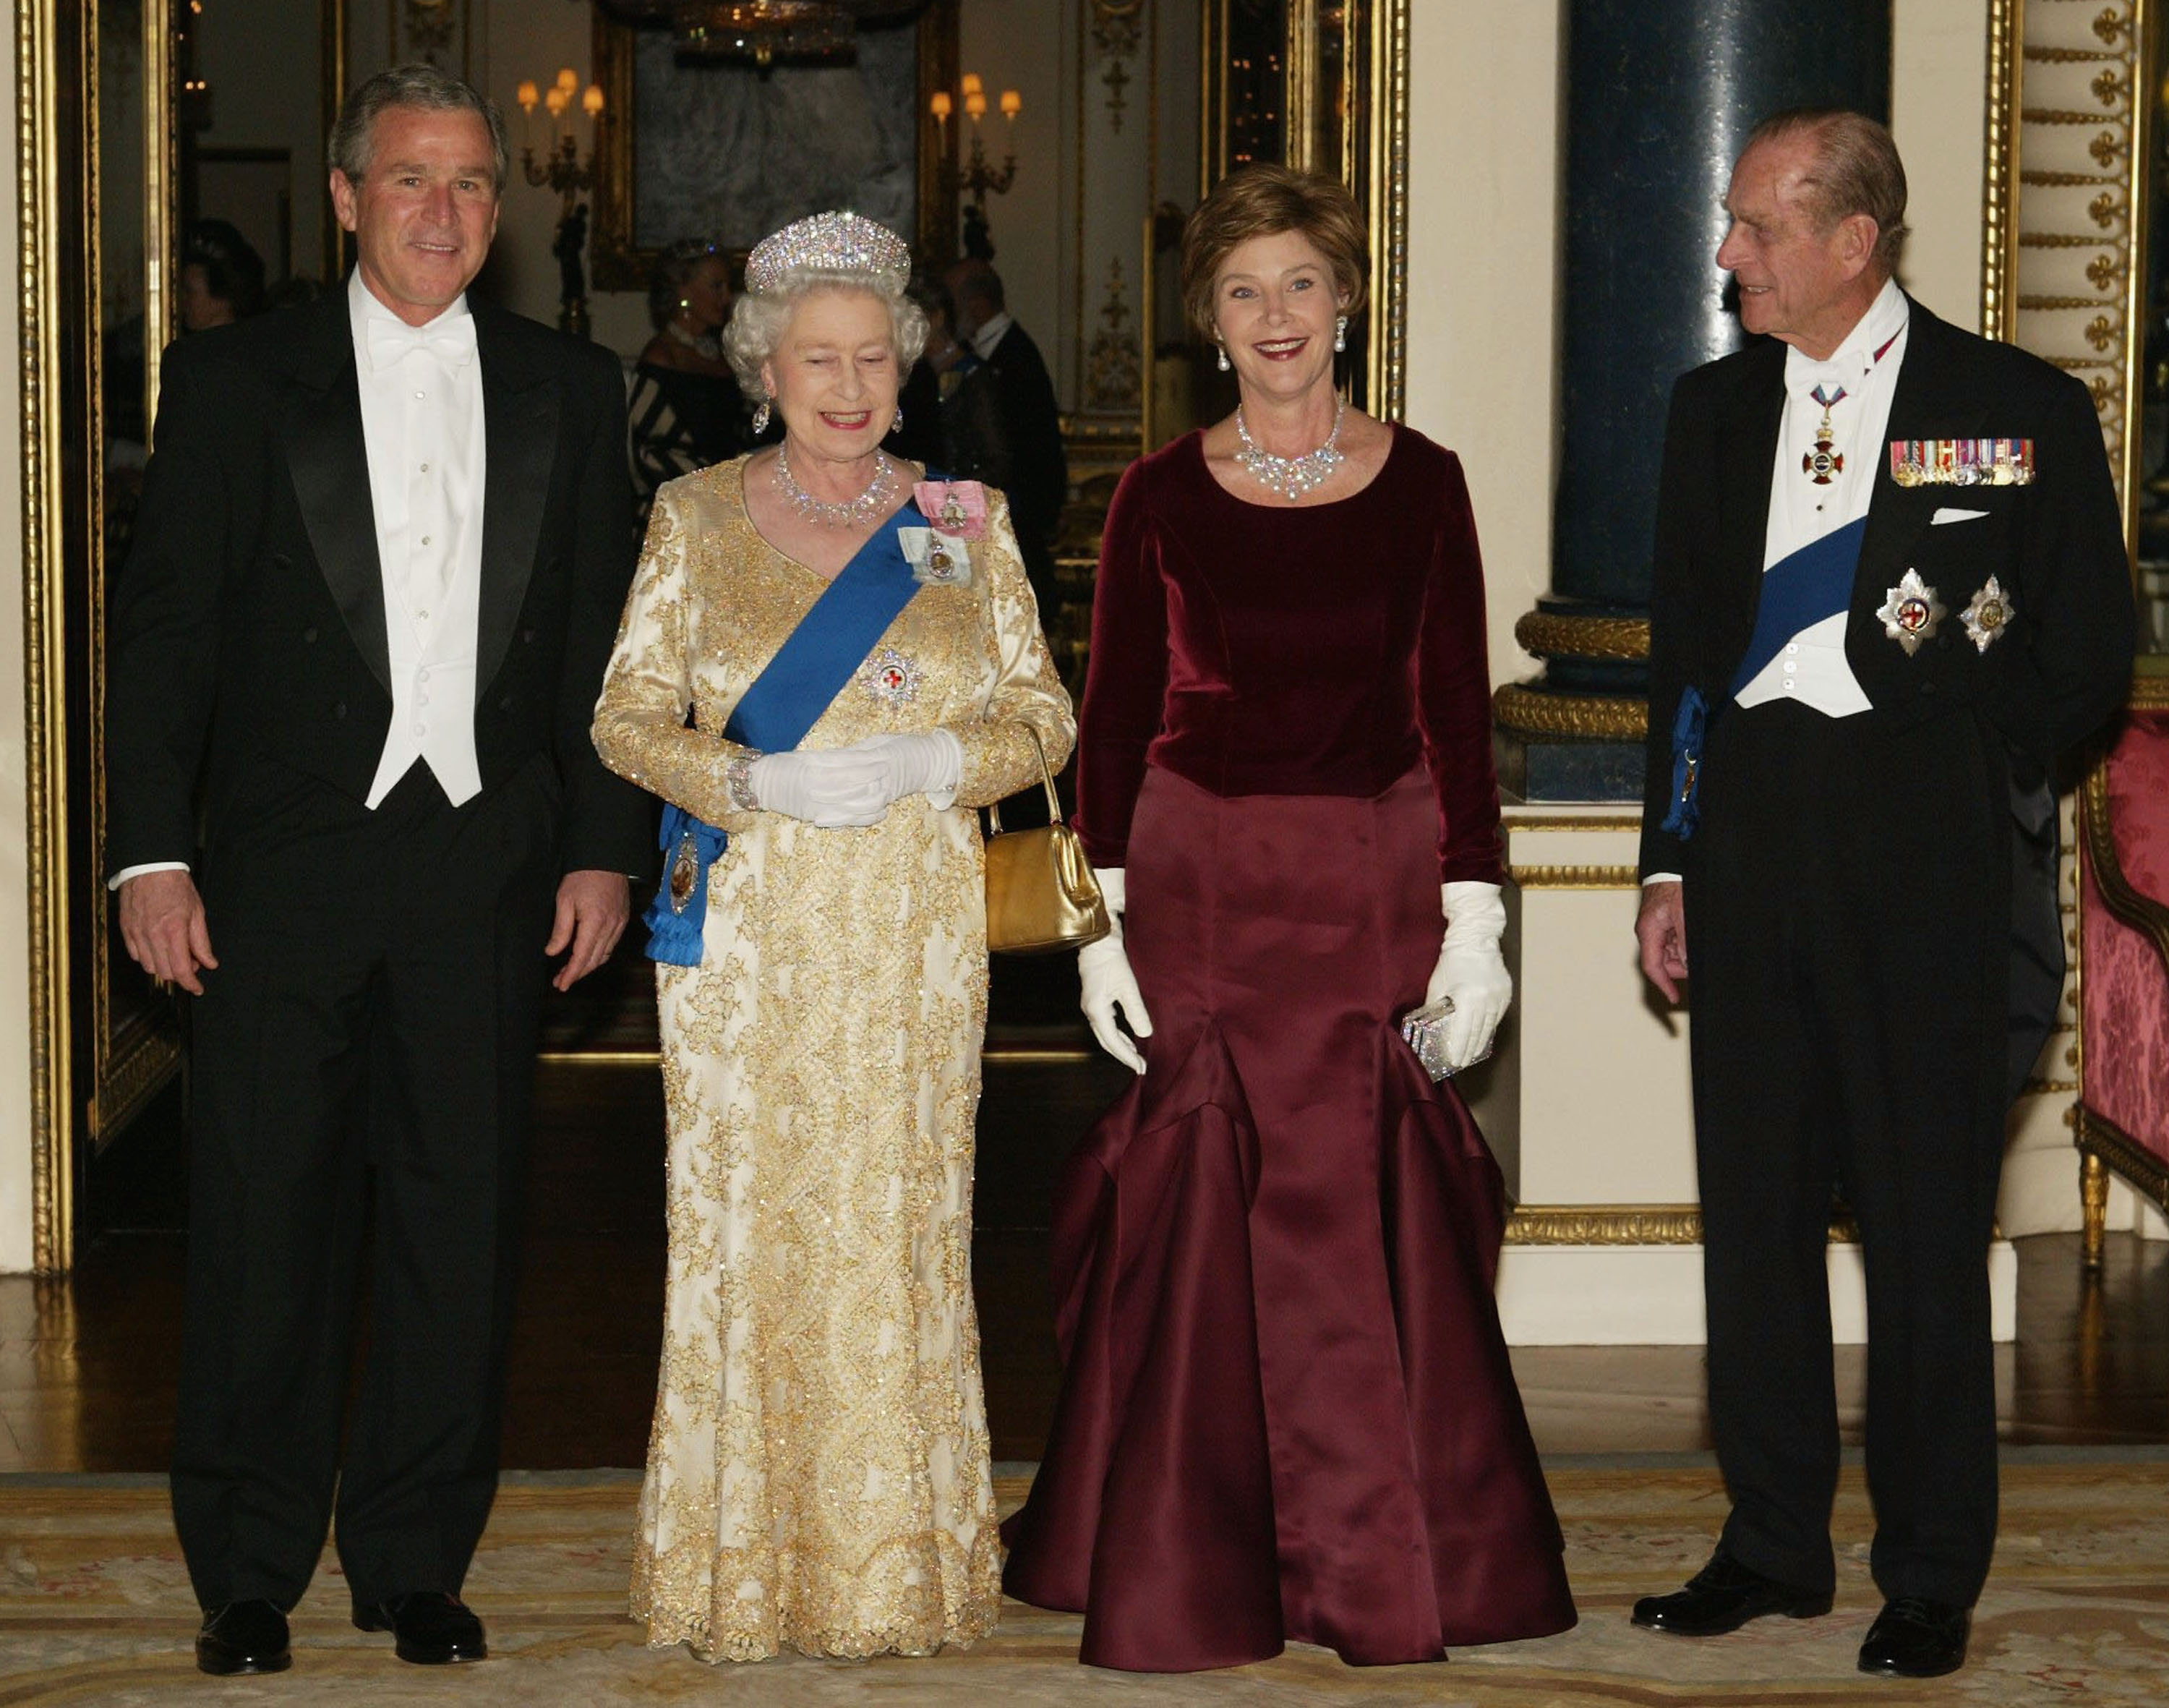 Queen Elizabeth II , U.S. President George W. Bush, First Lady Laura Bush and HRH the Duke of Edinburgh pose in the music room at Buckingham Palace on November 19, 2003 in London. (Getty Images)